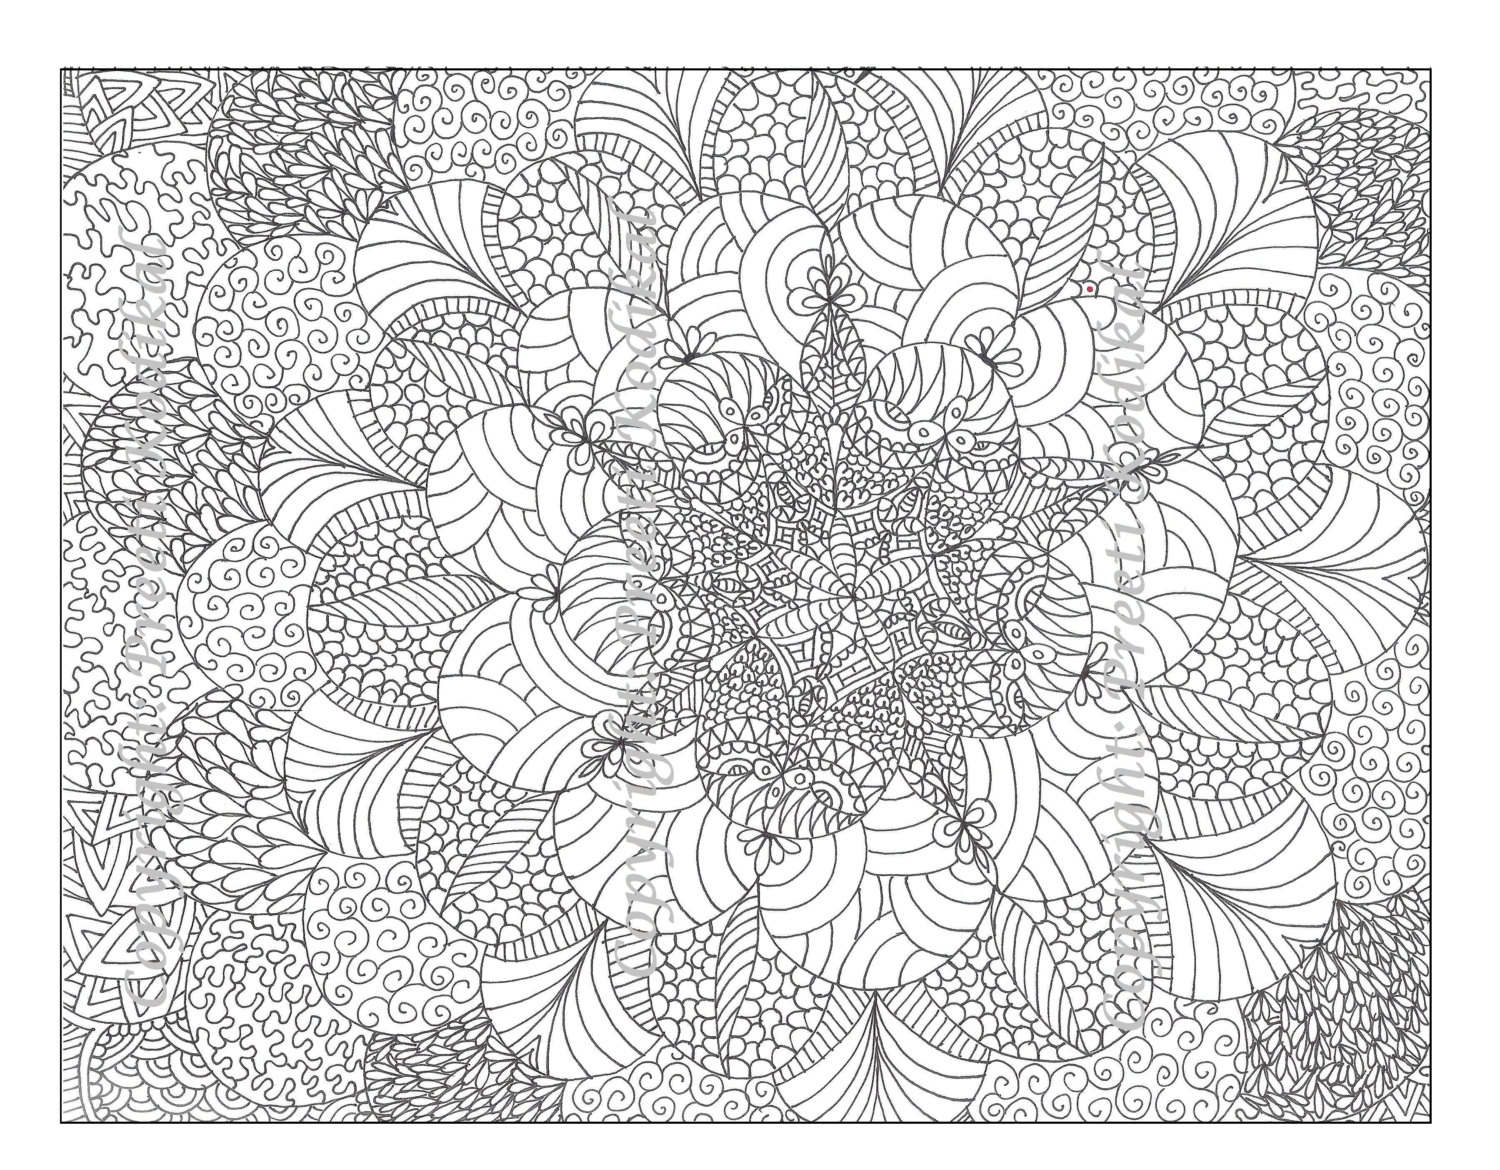 Download Free Printable Abstract Coloring Pages for Adults